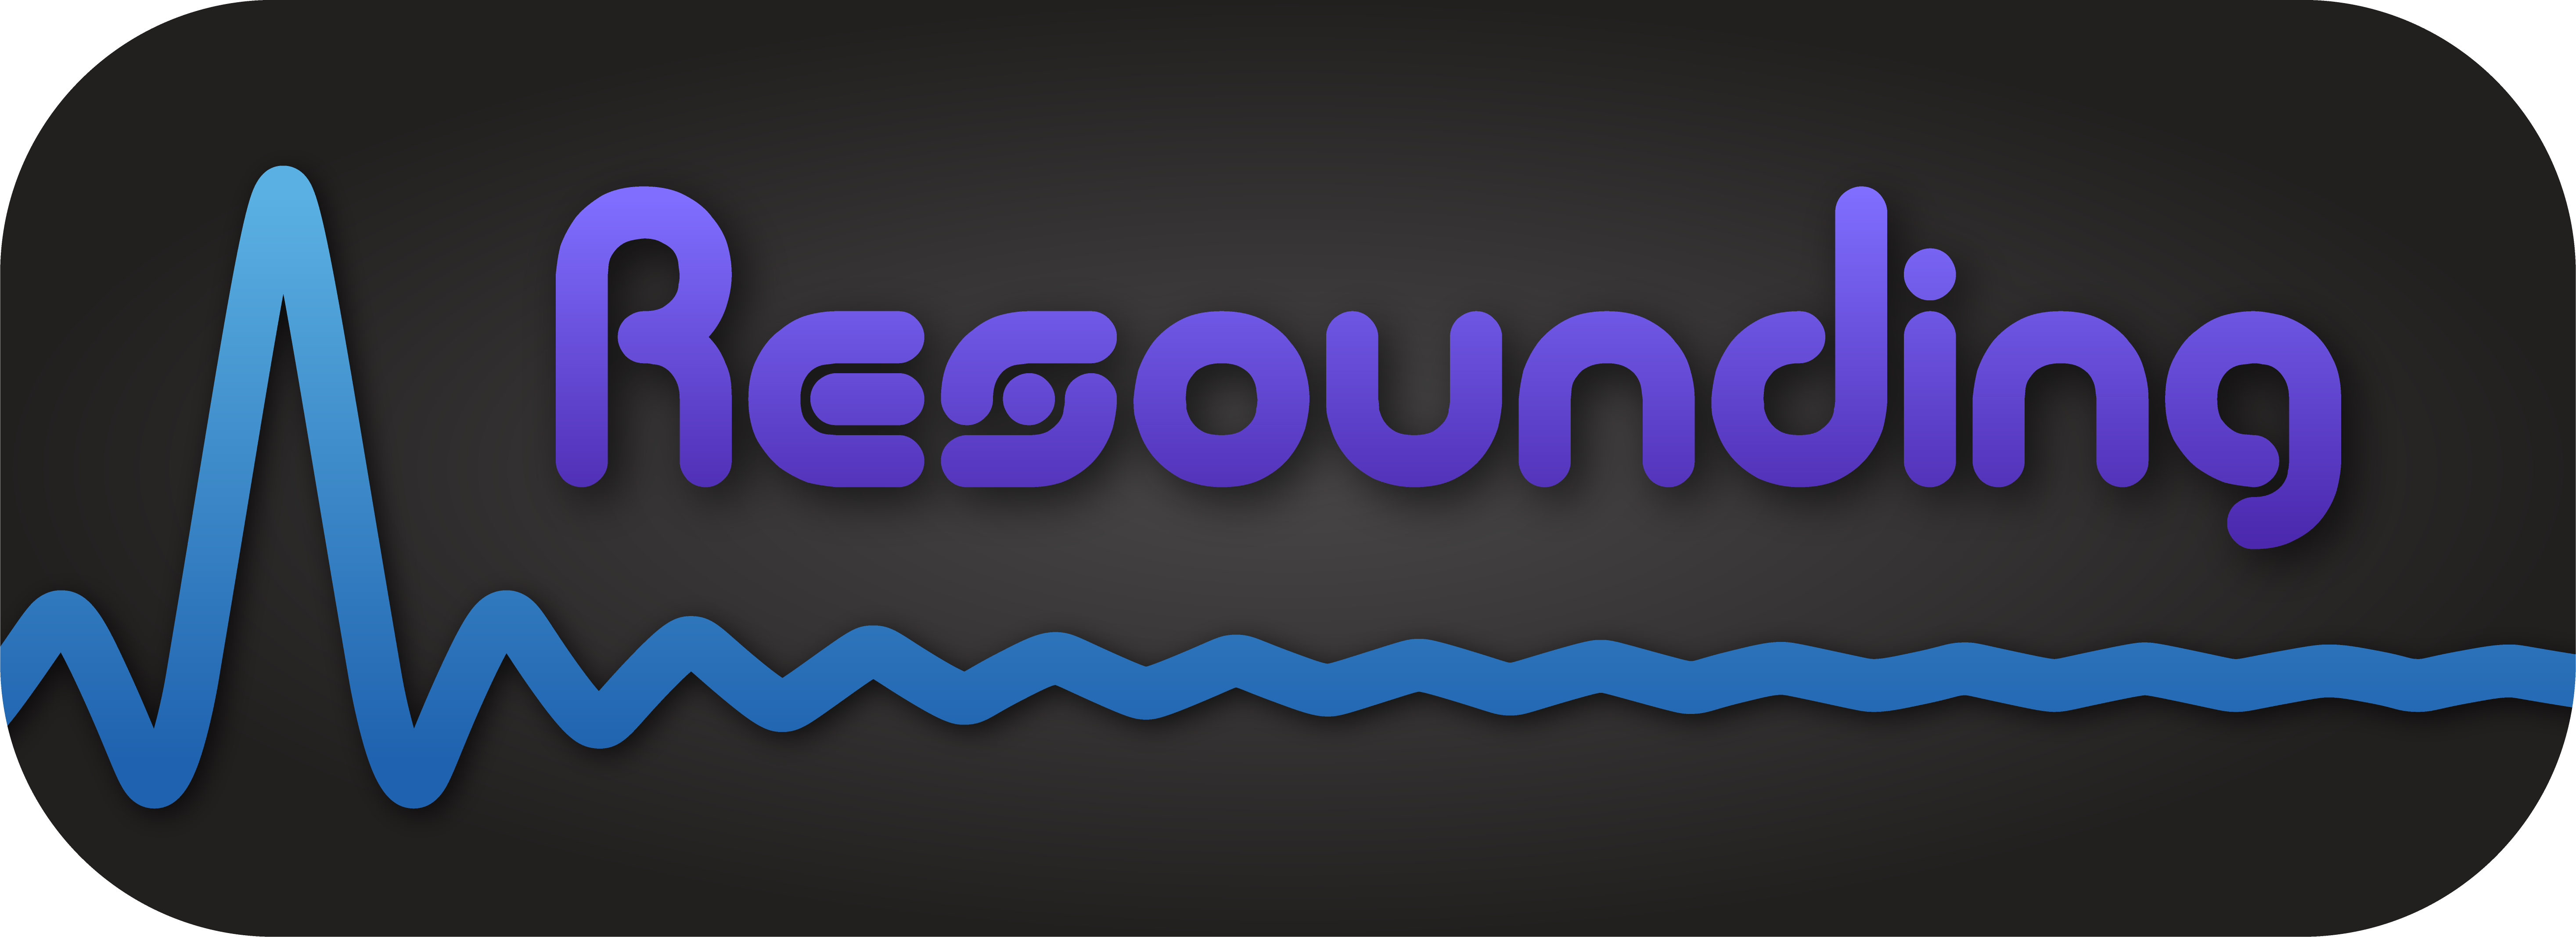 The Resounding banner, uploaded to test Gallery functionality